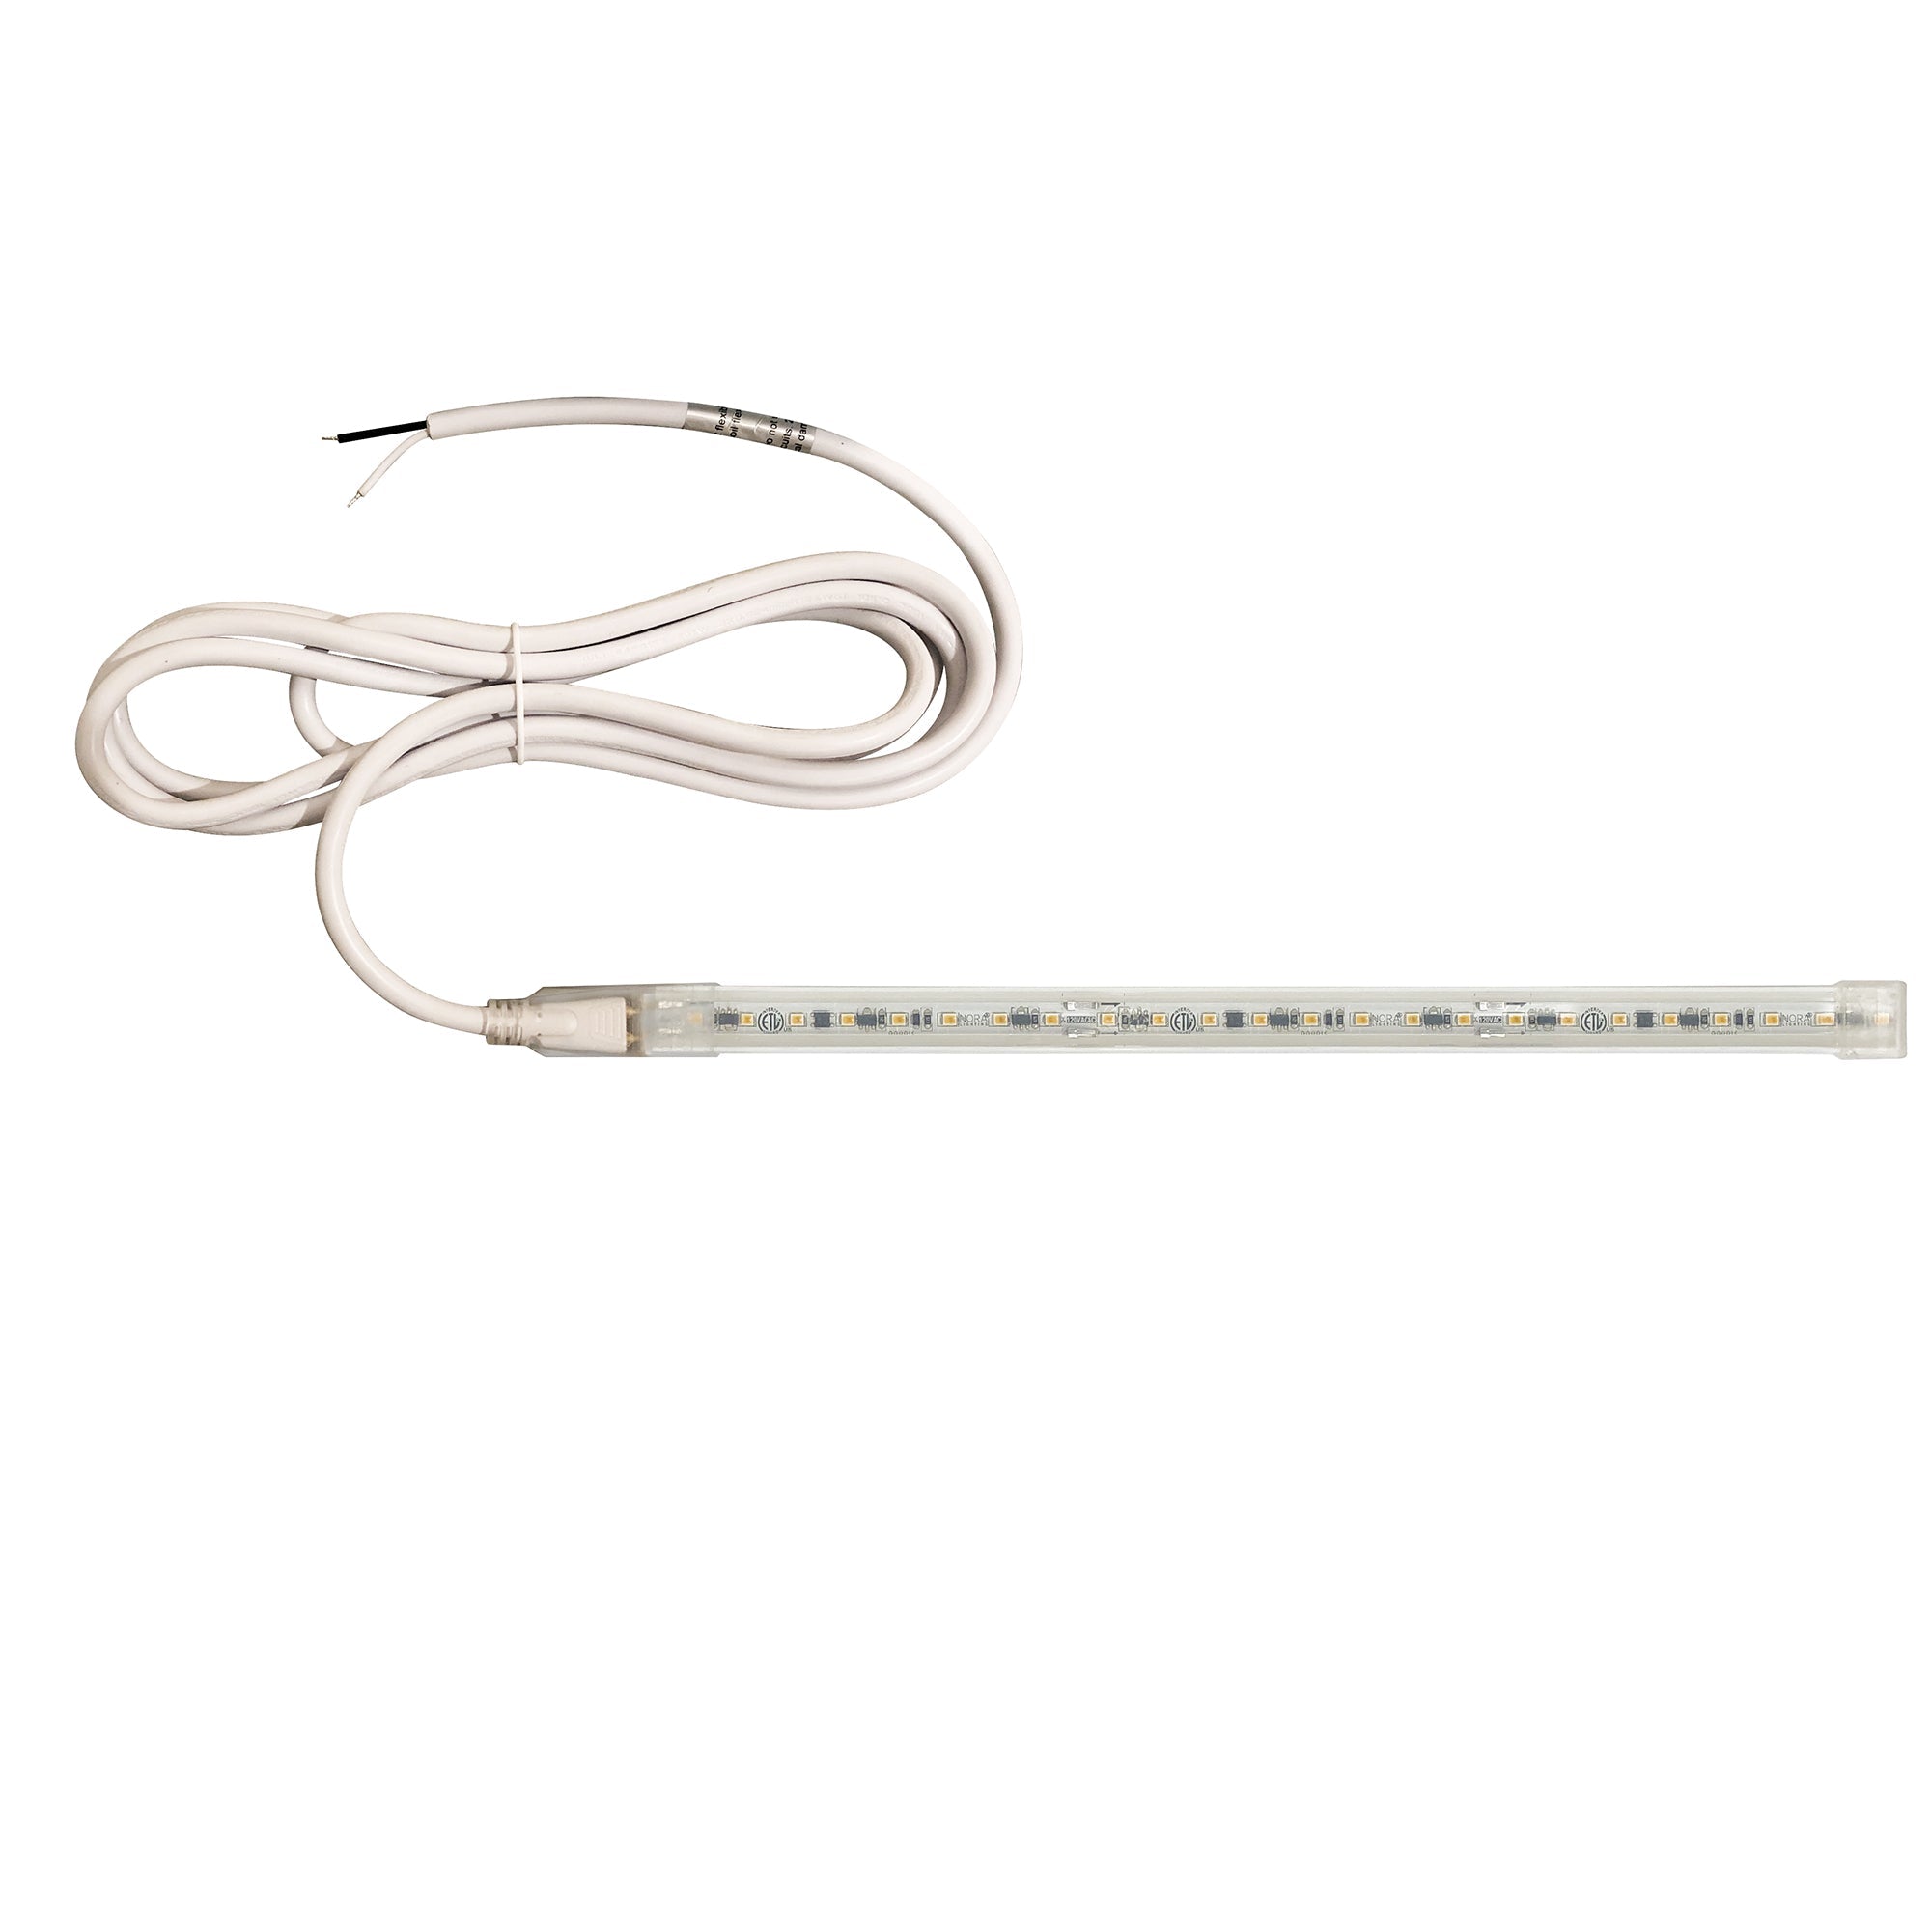 Nora Lighting NUTP13-W73-4-12-930/HW - Accent / Undercabinet - Custom Cut 73-ft, 4-in 120V Continuous LED Tape Light, 330lm / 3.6W per foot, 3000K, w/ Mounting Clips and 8' Hardwired Power Cord